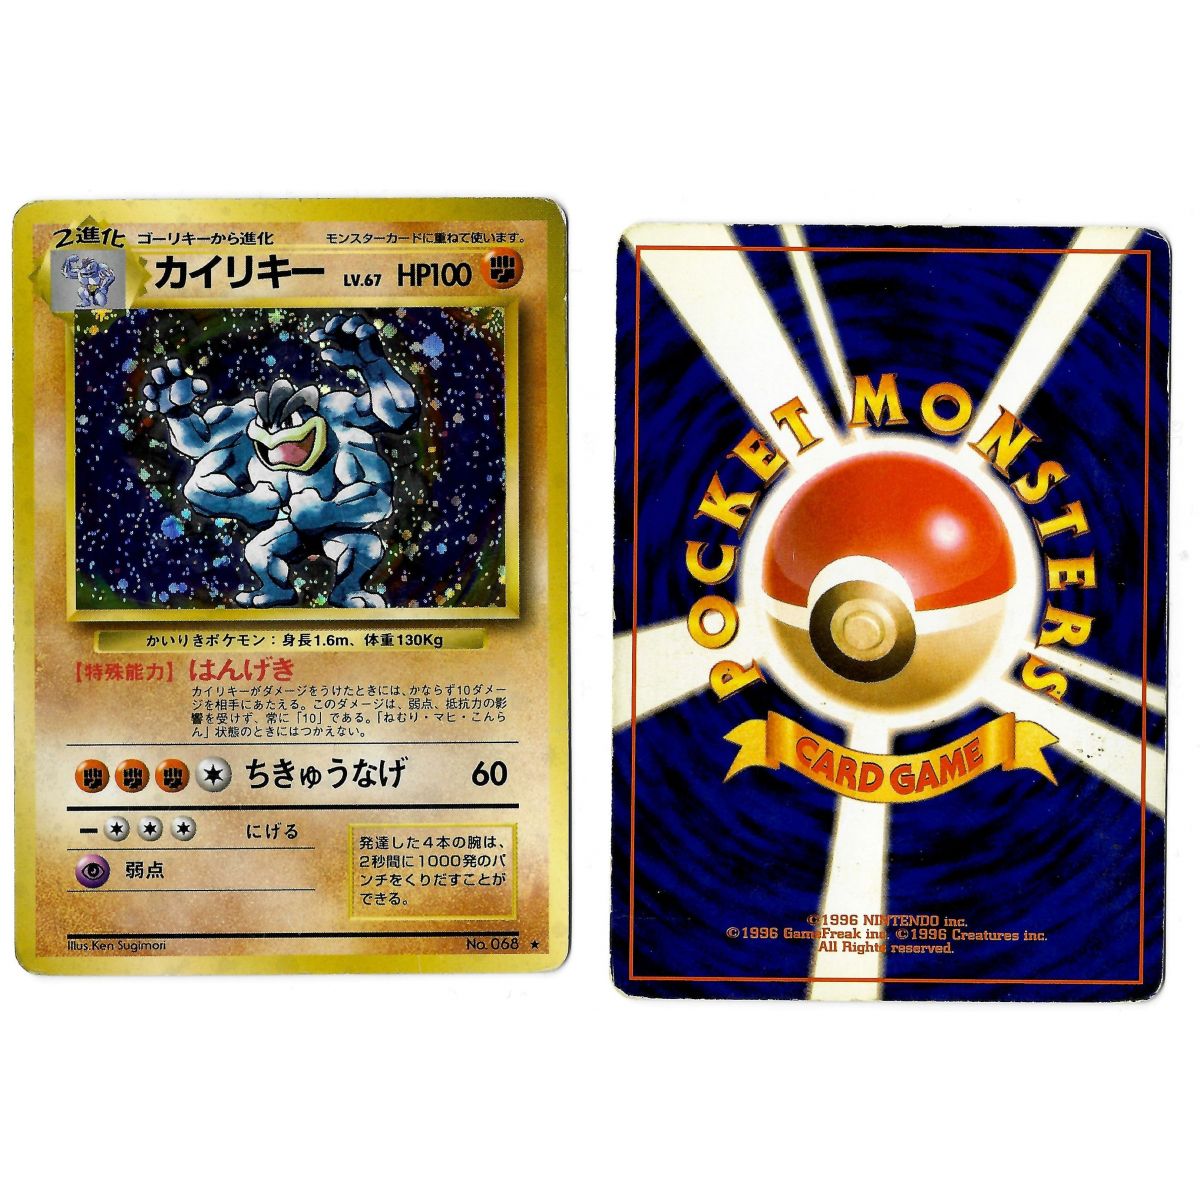 Item Machamp (5) No.068 Expansion Pack BS Holo Unlimited Japanese View Scan